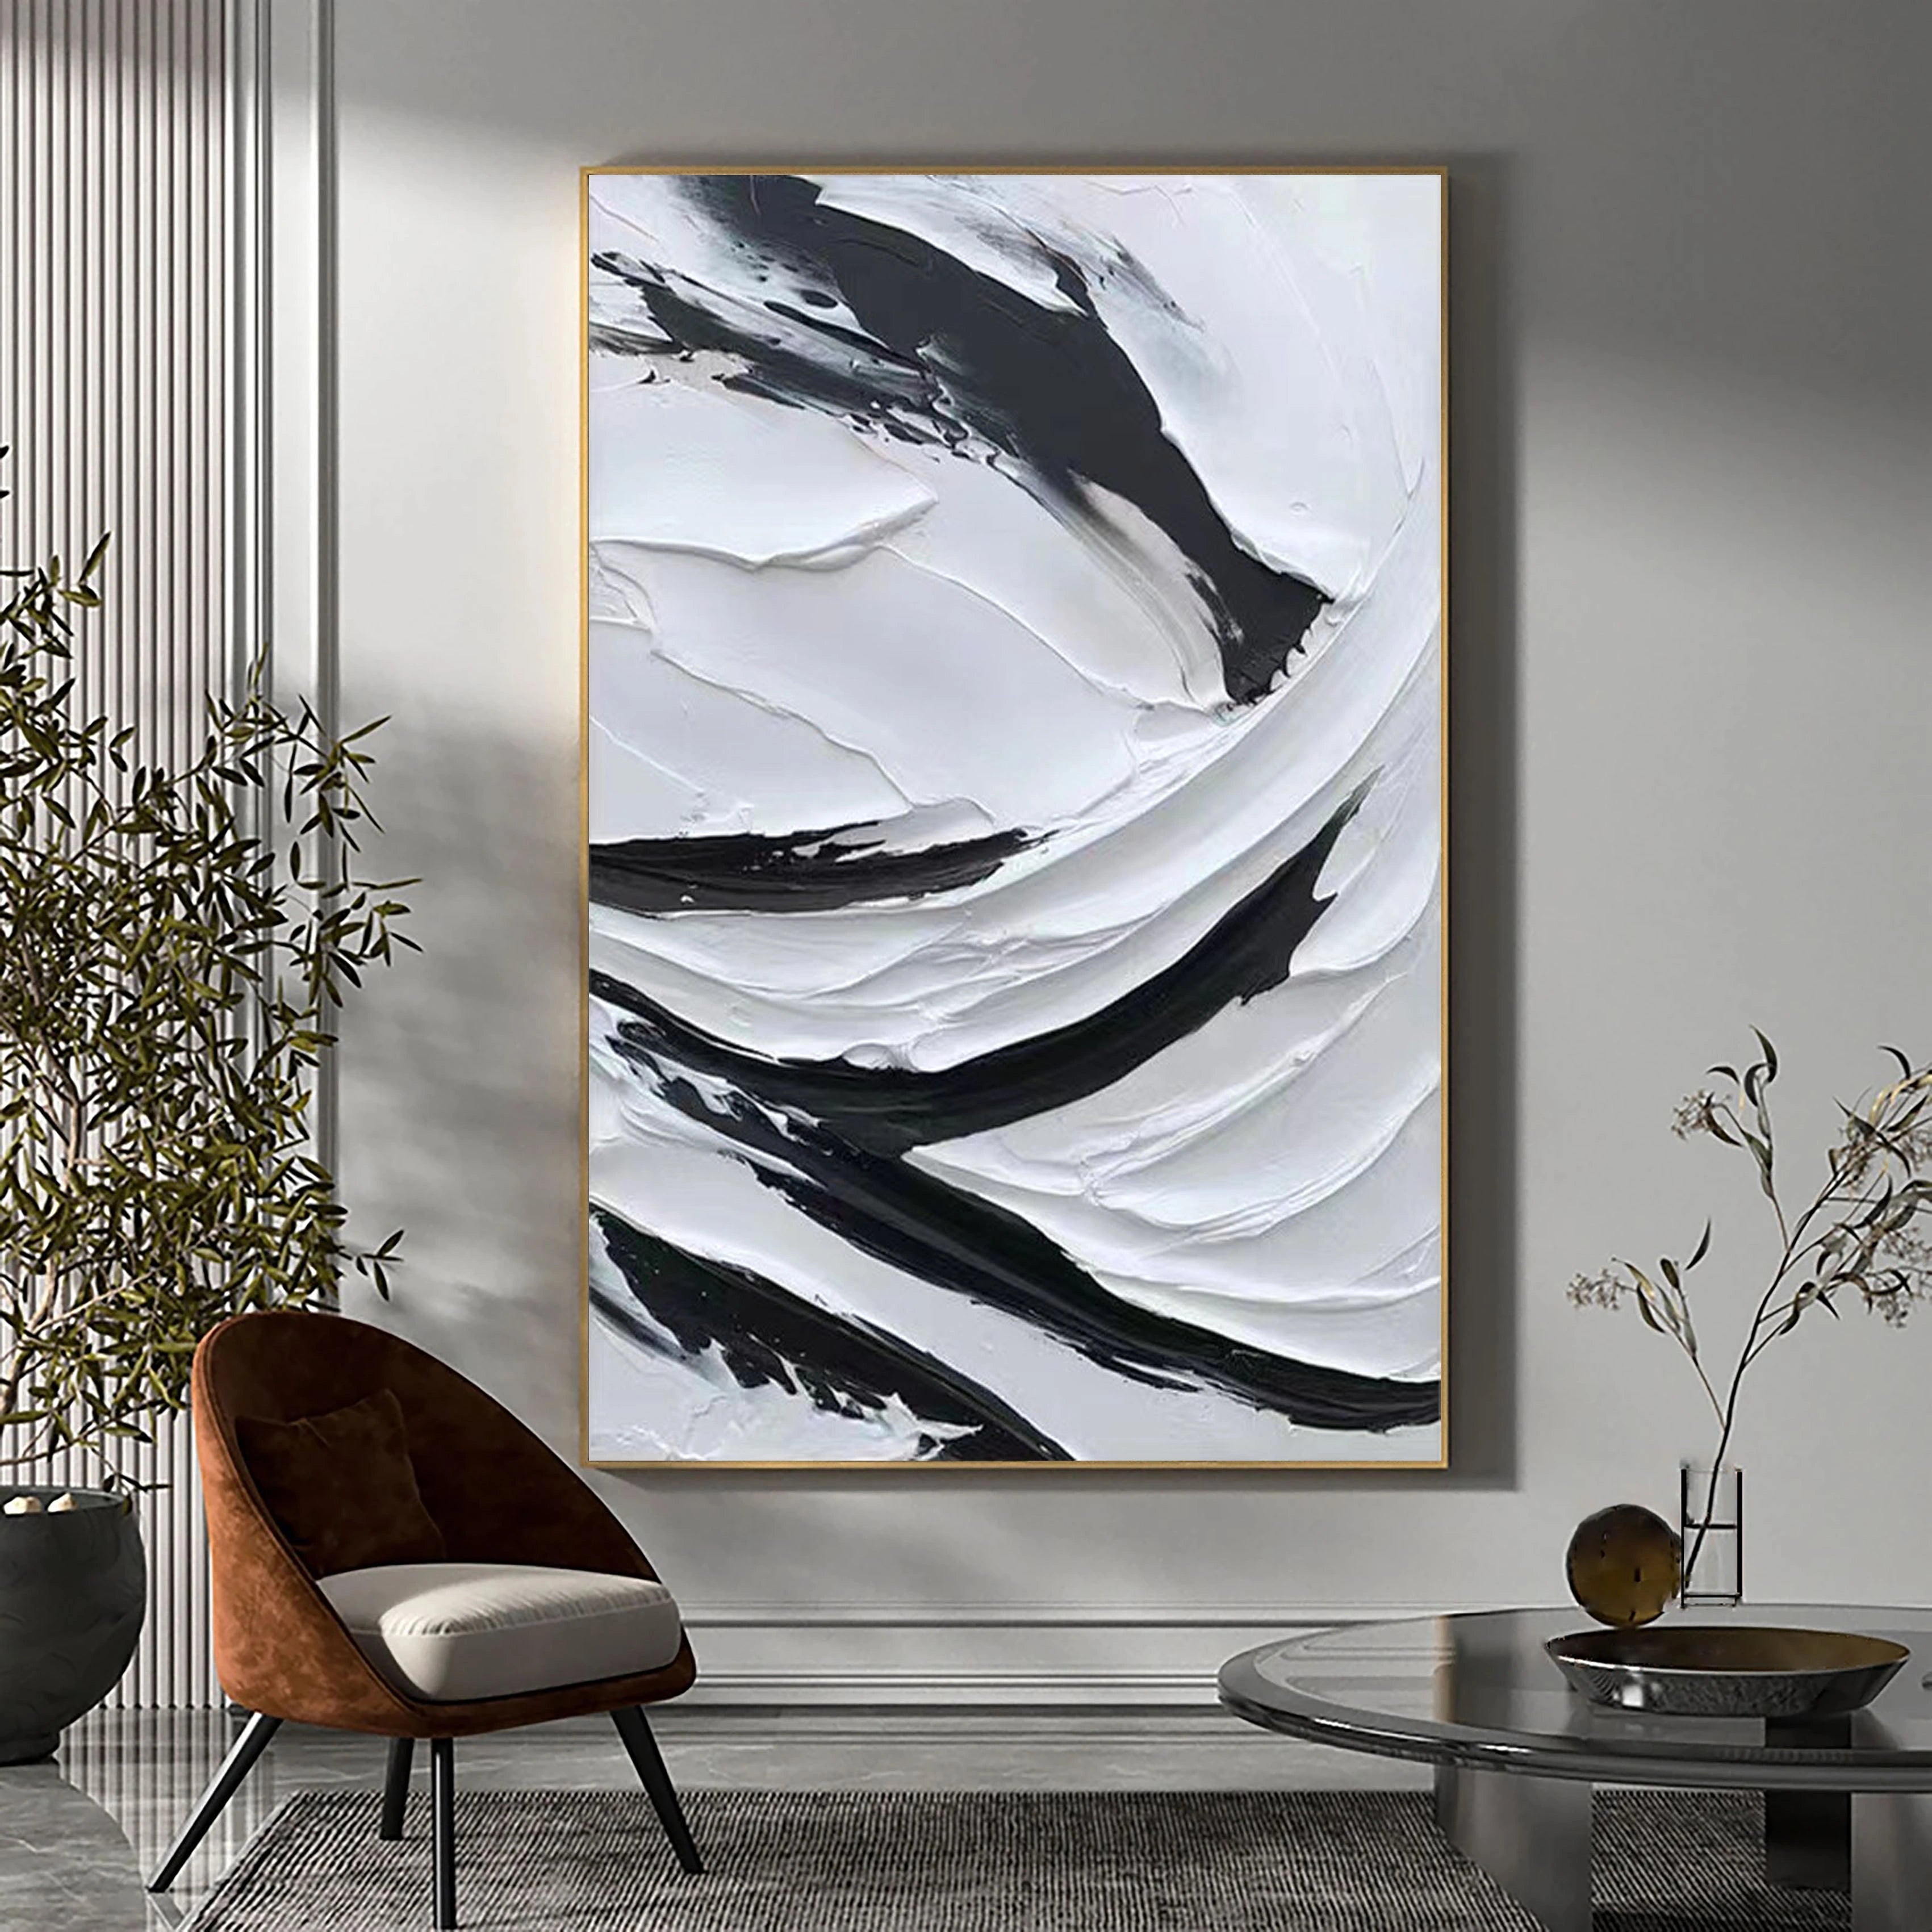 Black and White Plaster Art Textured Painting on Canvas Wall Decor